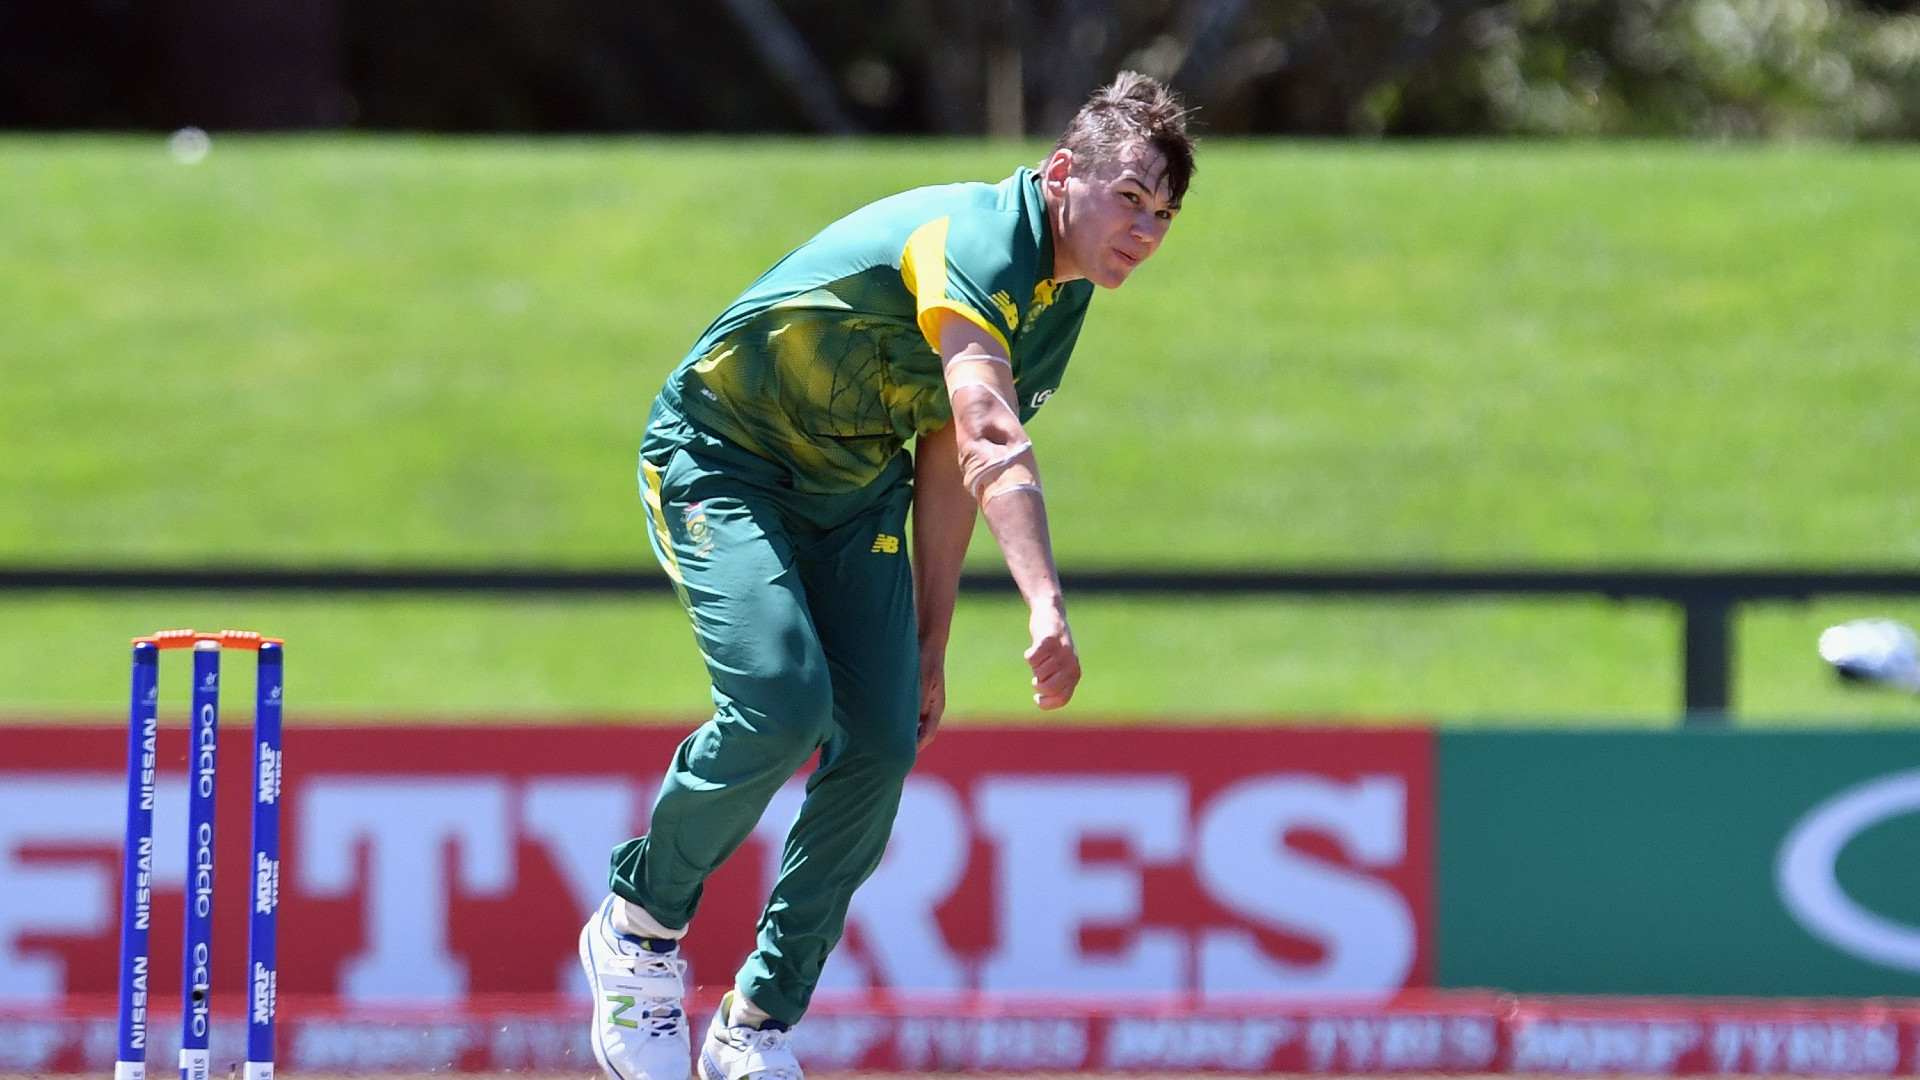 Gerald Coetzee is considered one of the most promising bowlers in South African cricket. (Image Credit: Twitter)